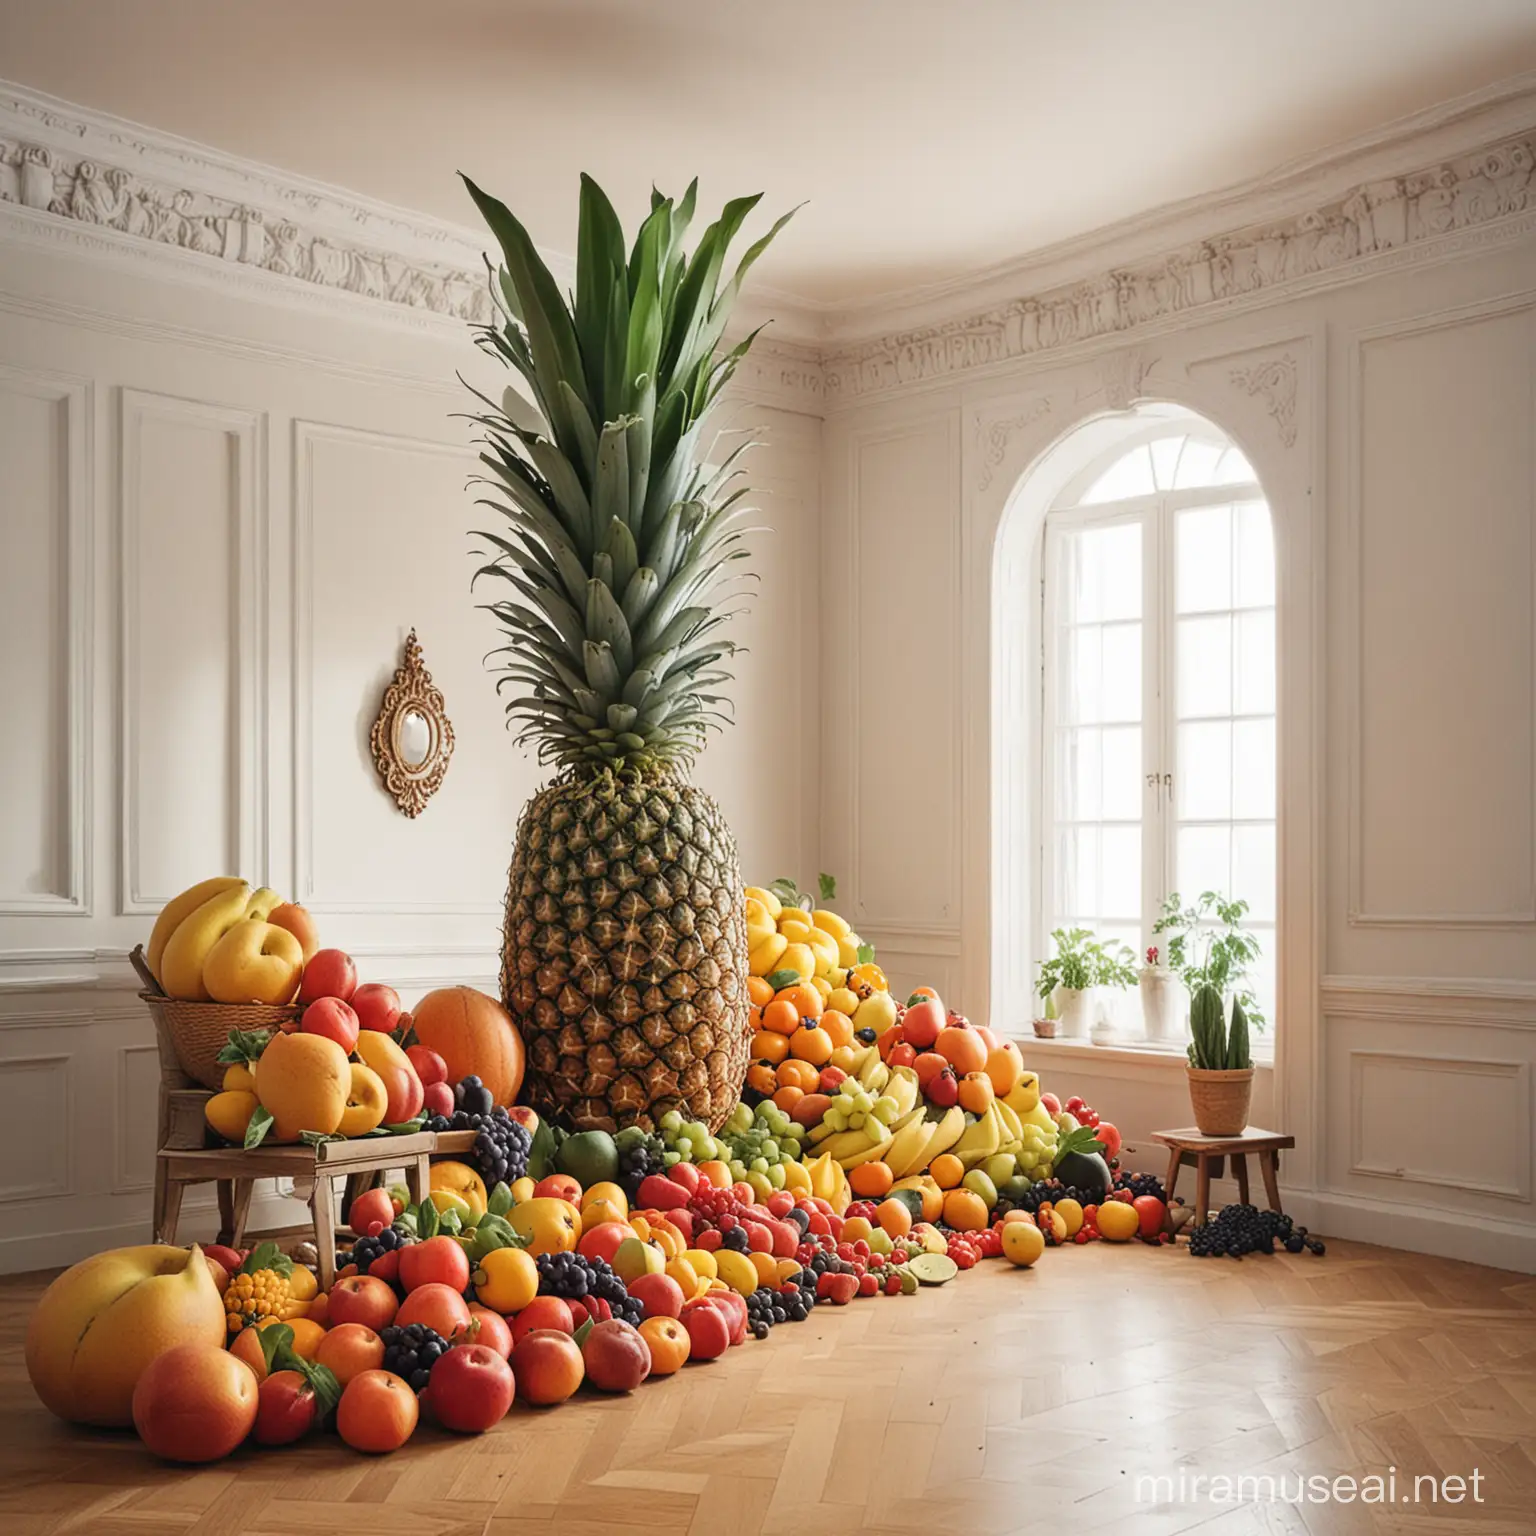 Giant Fresh fruits in a room